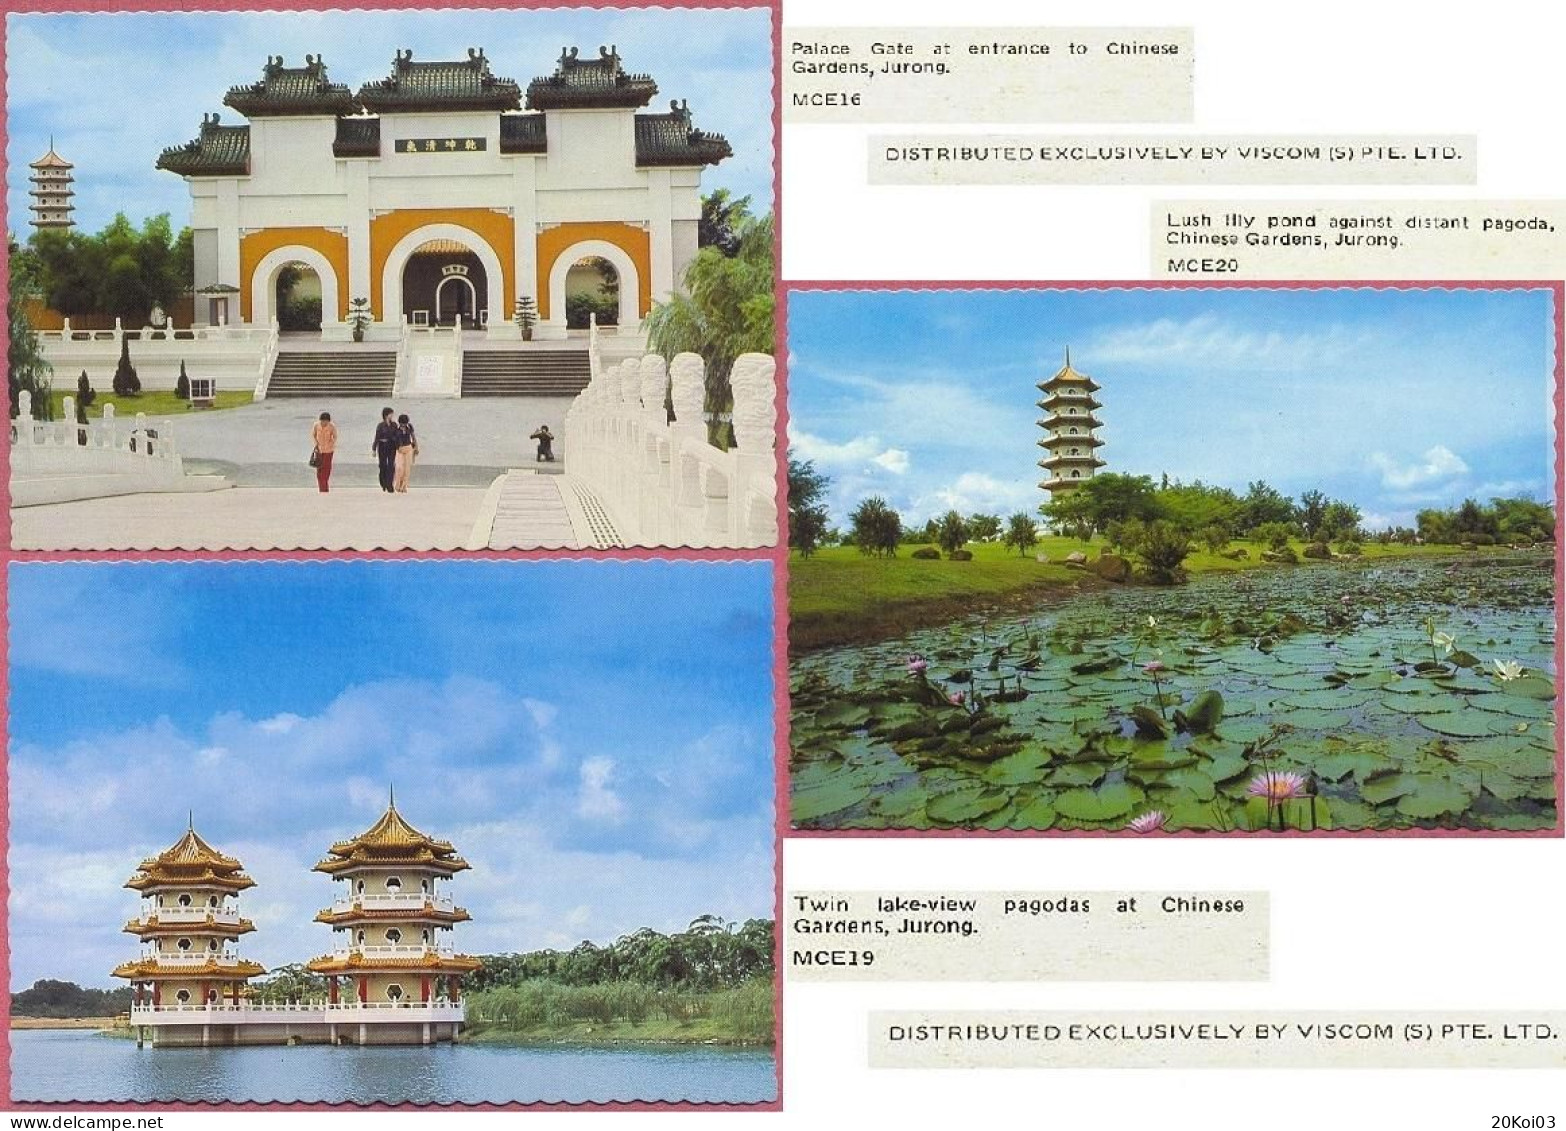 Singapore Chinese Gardens, Jurong 1978's MCE16-19-20 DISTRIBUTED EXCLUSIVELY BY VISCOM (S) PTE. LTD. Vintage UNC_cpc - Singapore